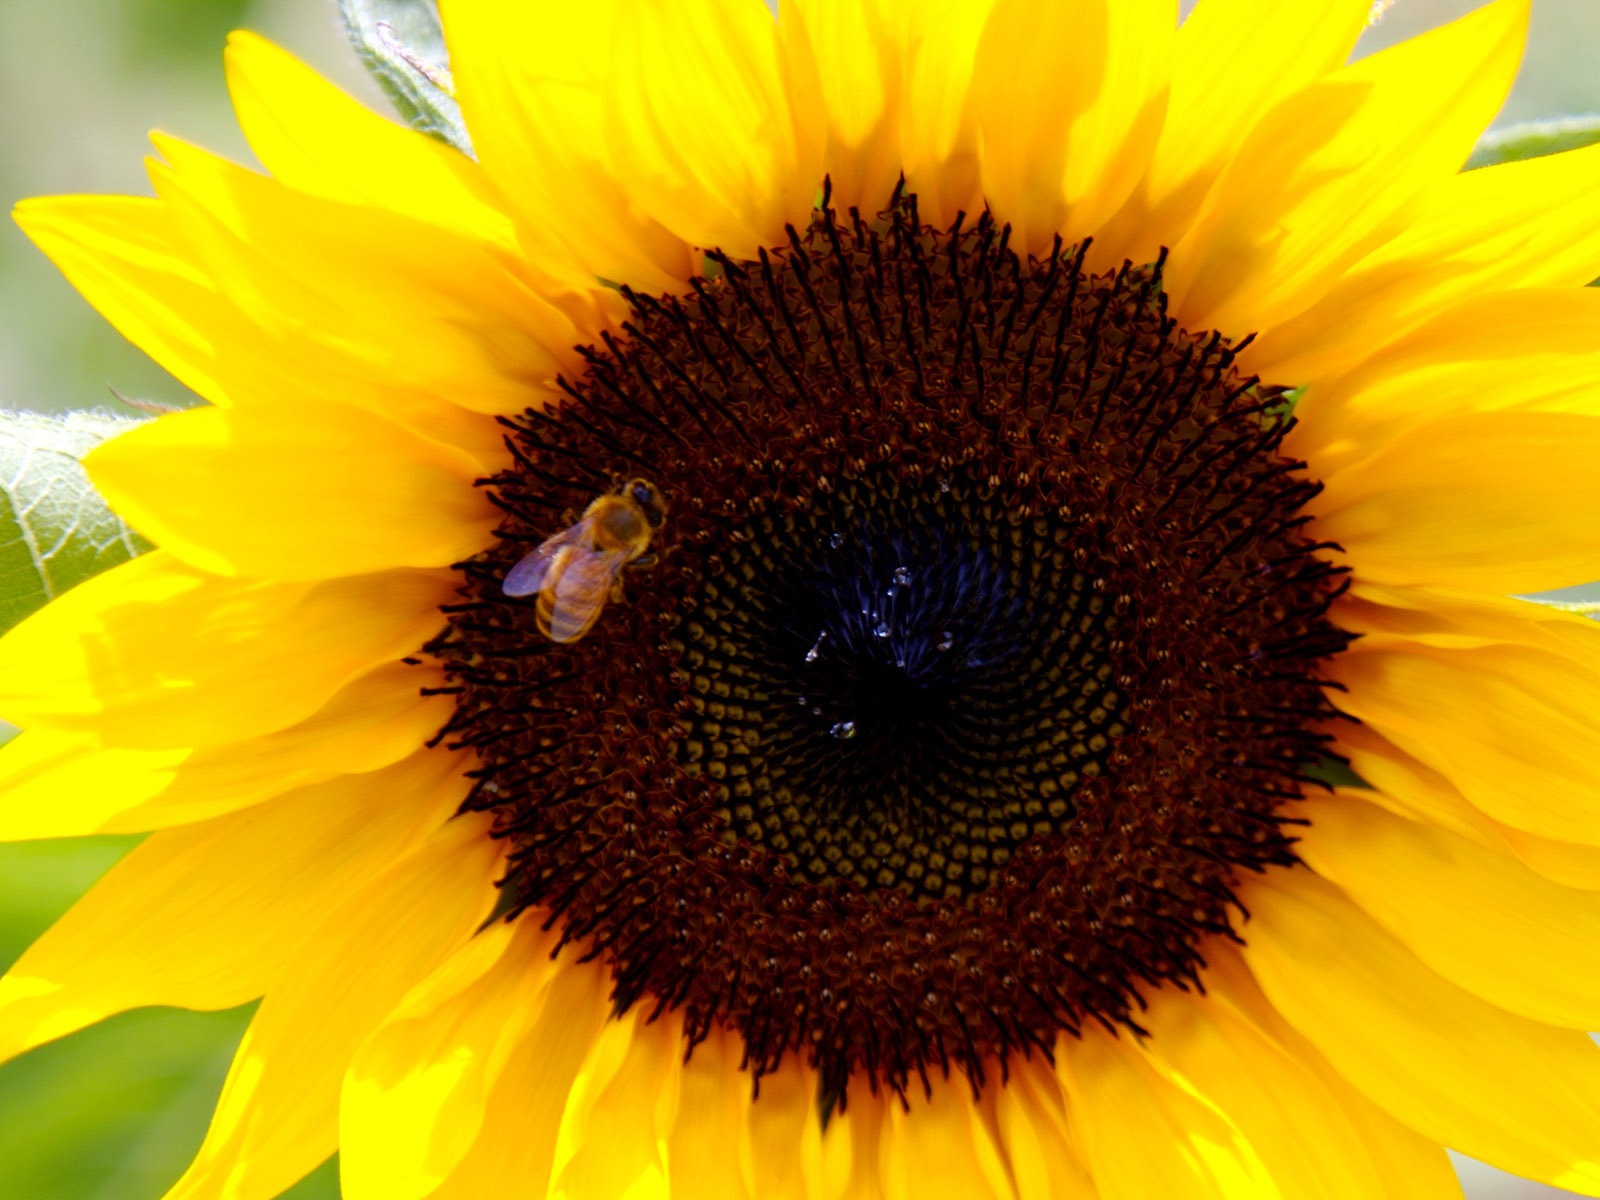 Sunny sunflower photo HD Wallpapers #24 - 1600x1200